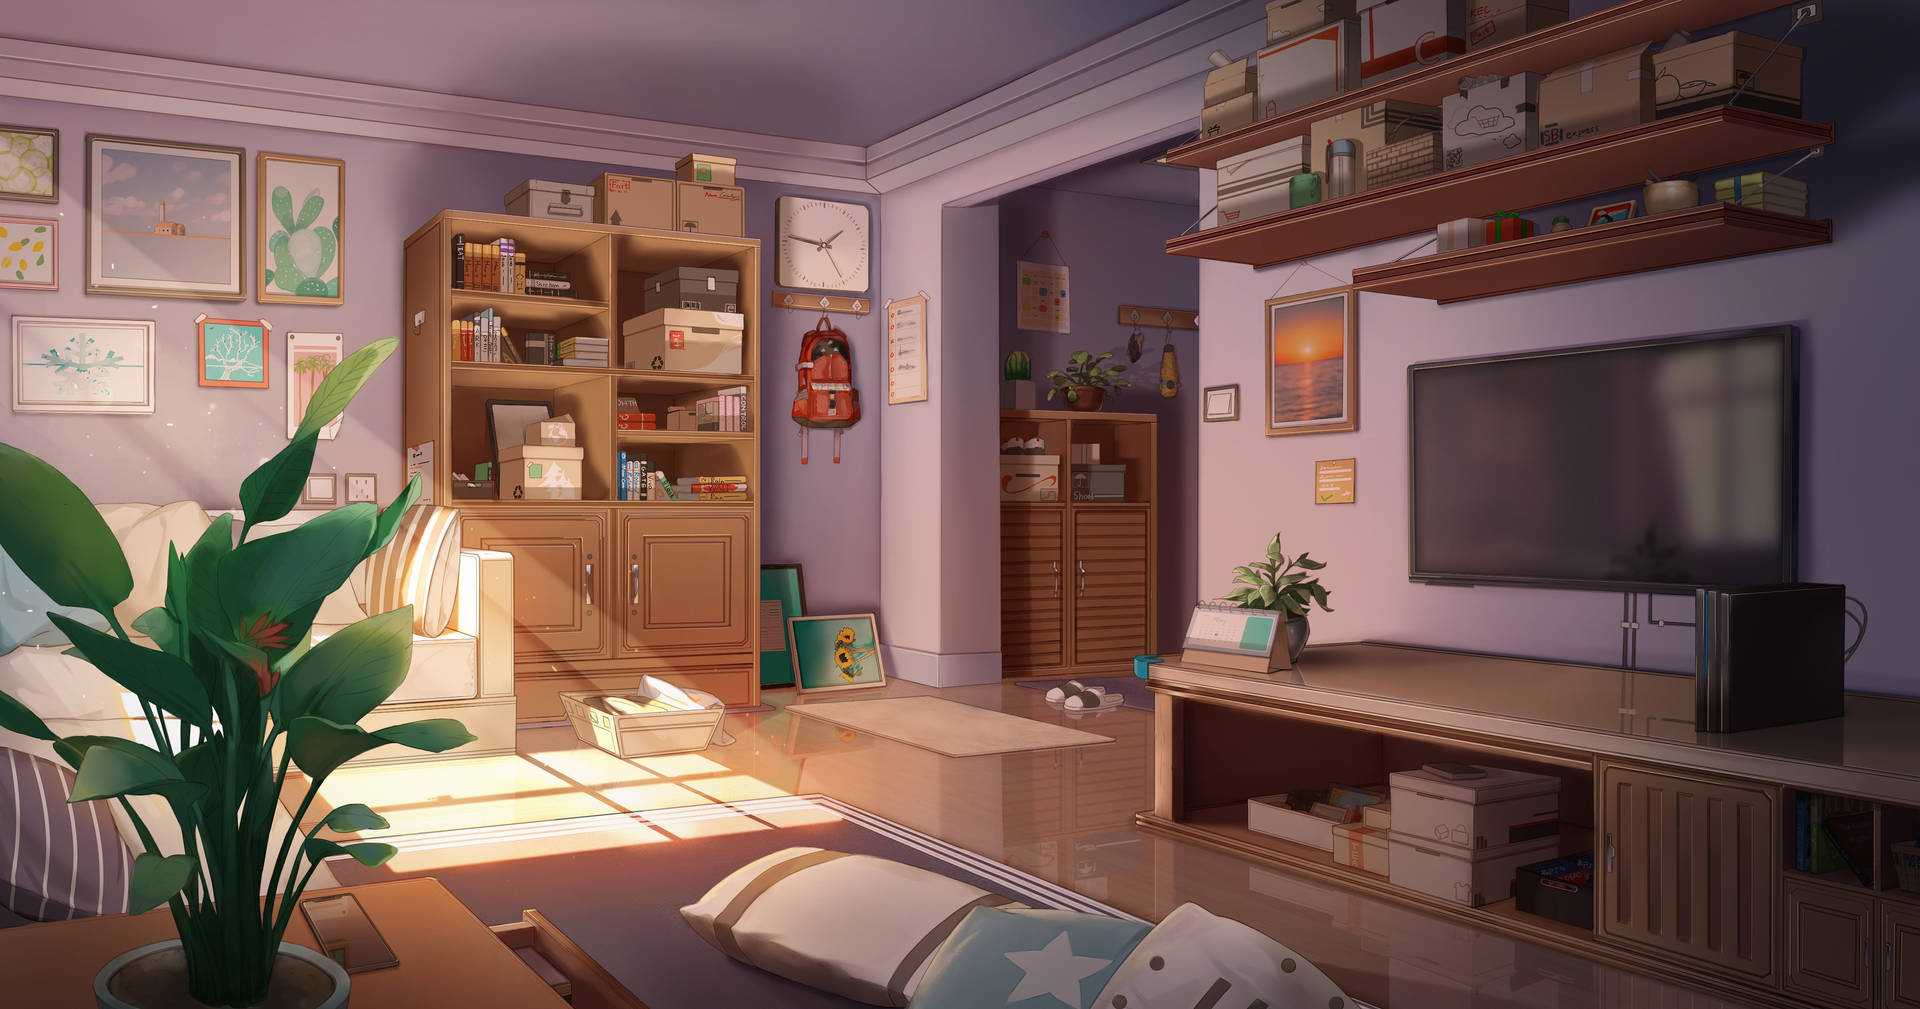 A Dreamy Anime-inspired Bedroom Background